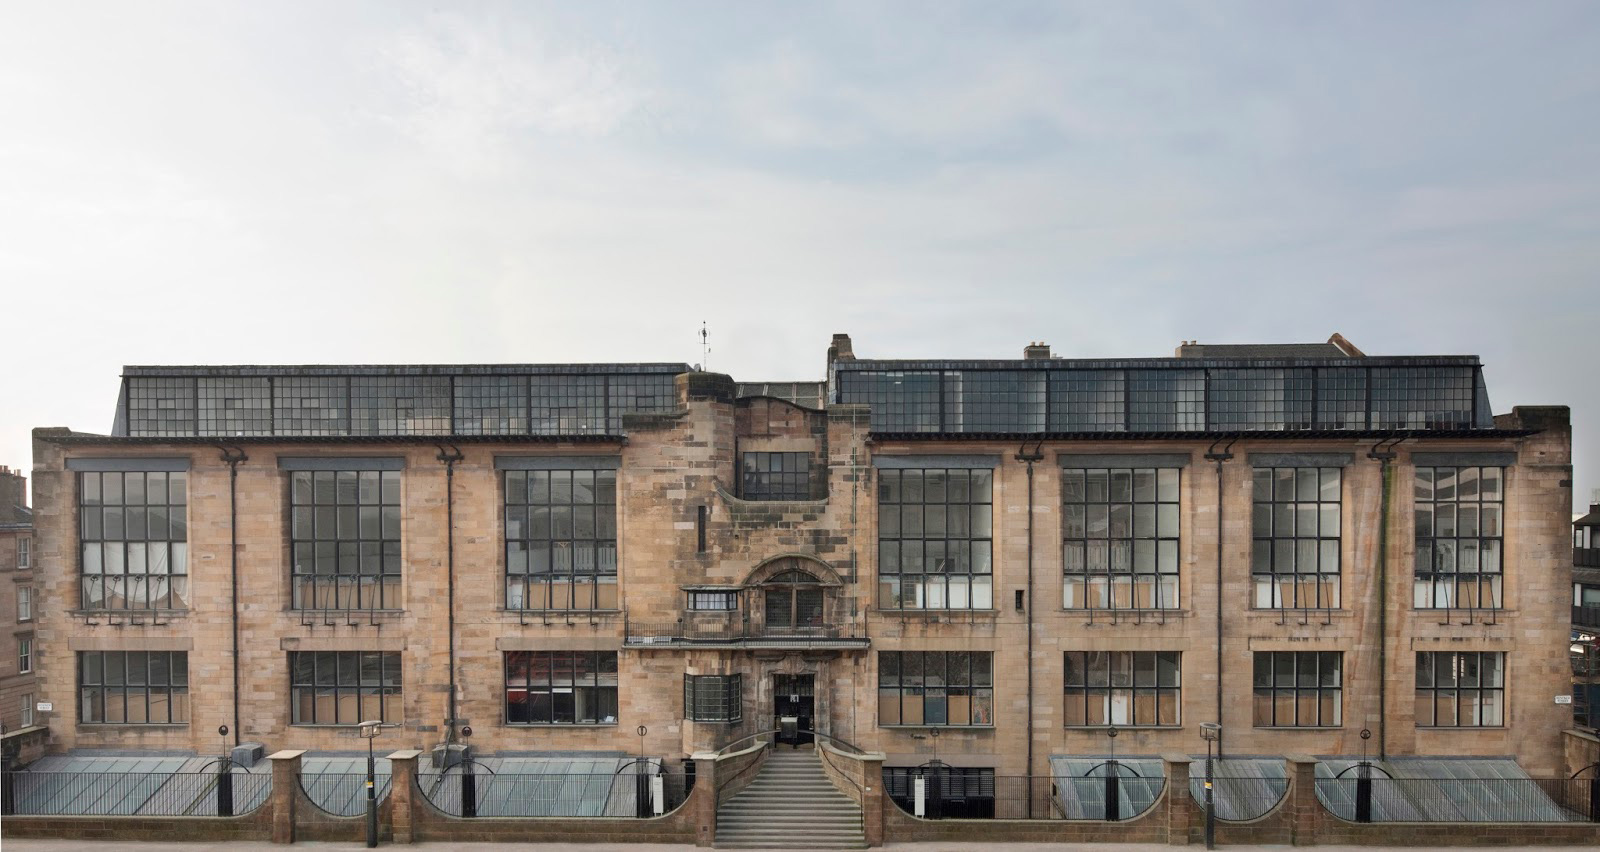 The Glasgow School of Art's Mackintosh Building as it was before the 2014 fire. Photography: Alan McAteer / Glasgow School of Art